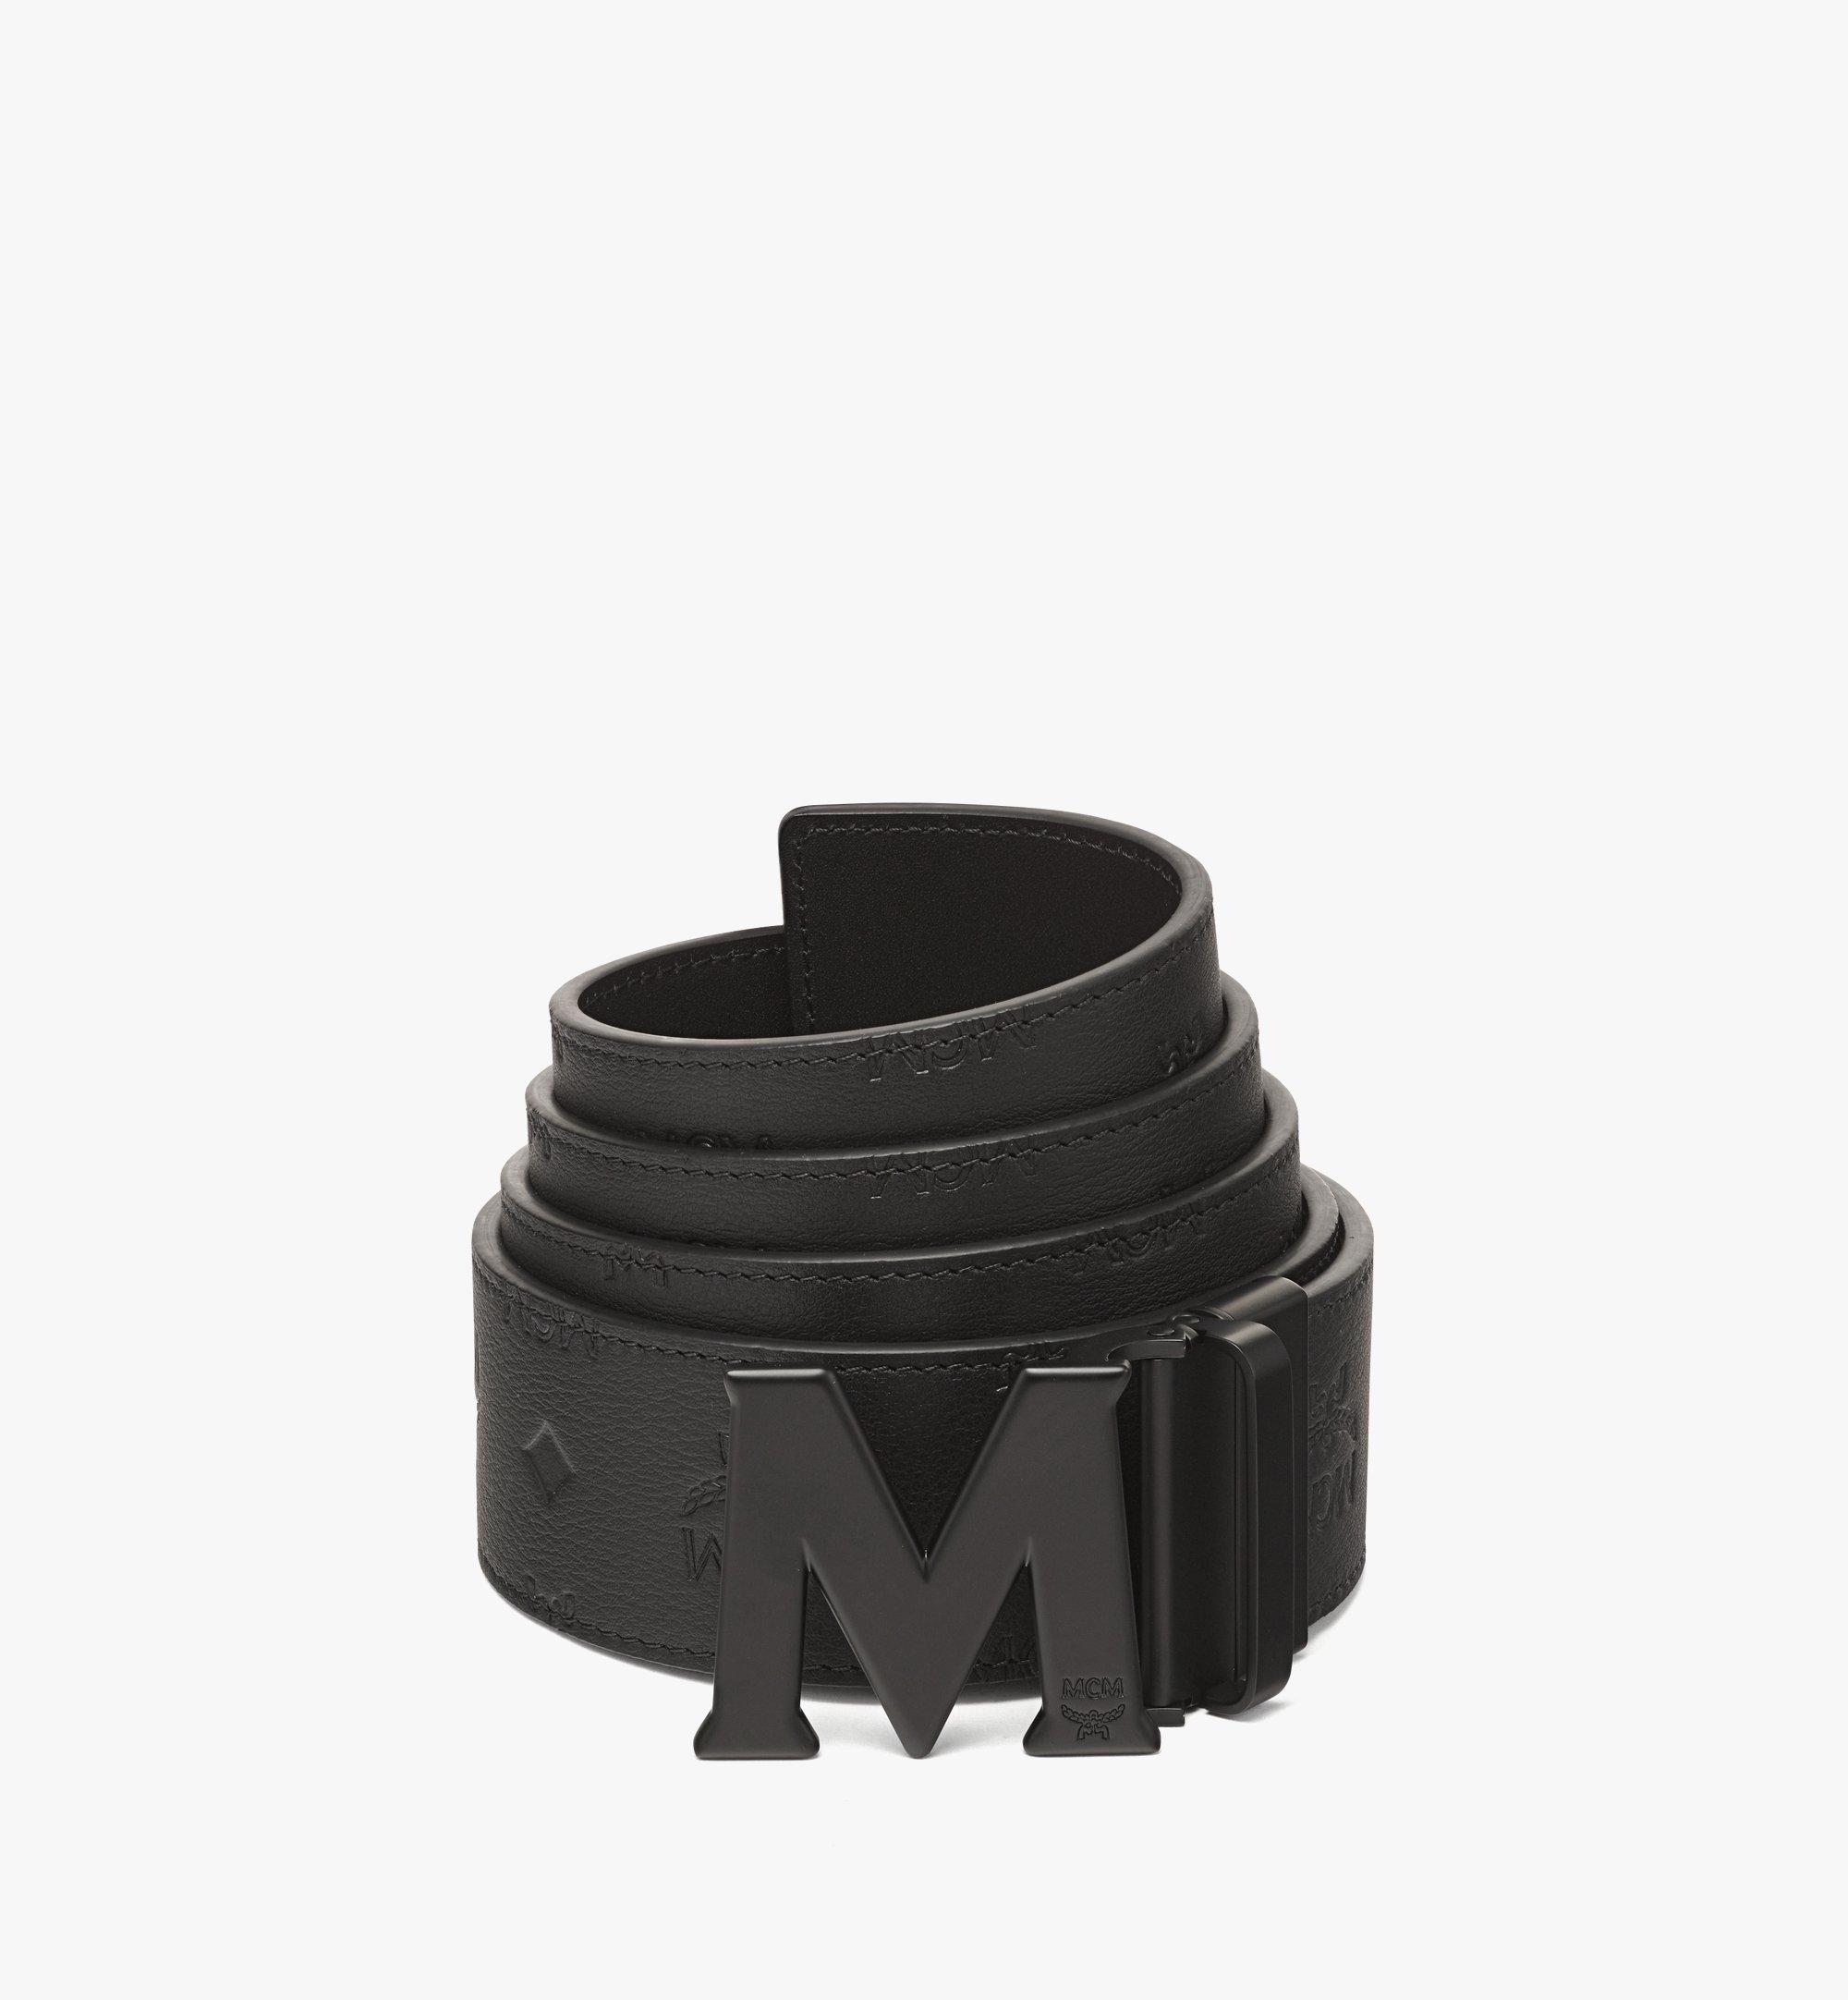 Mode Travia Reversible Belt 1” in Embossed Leather